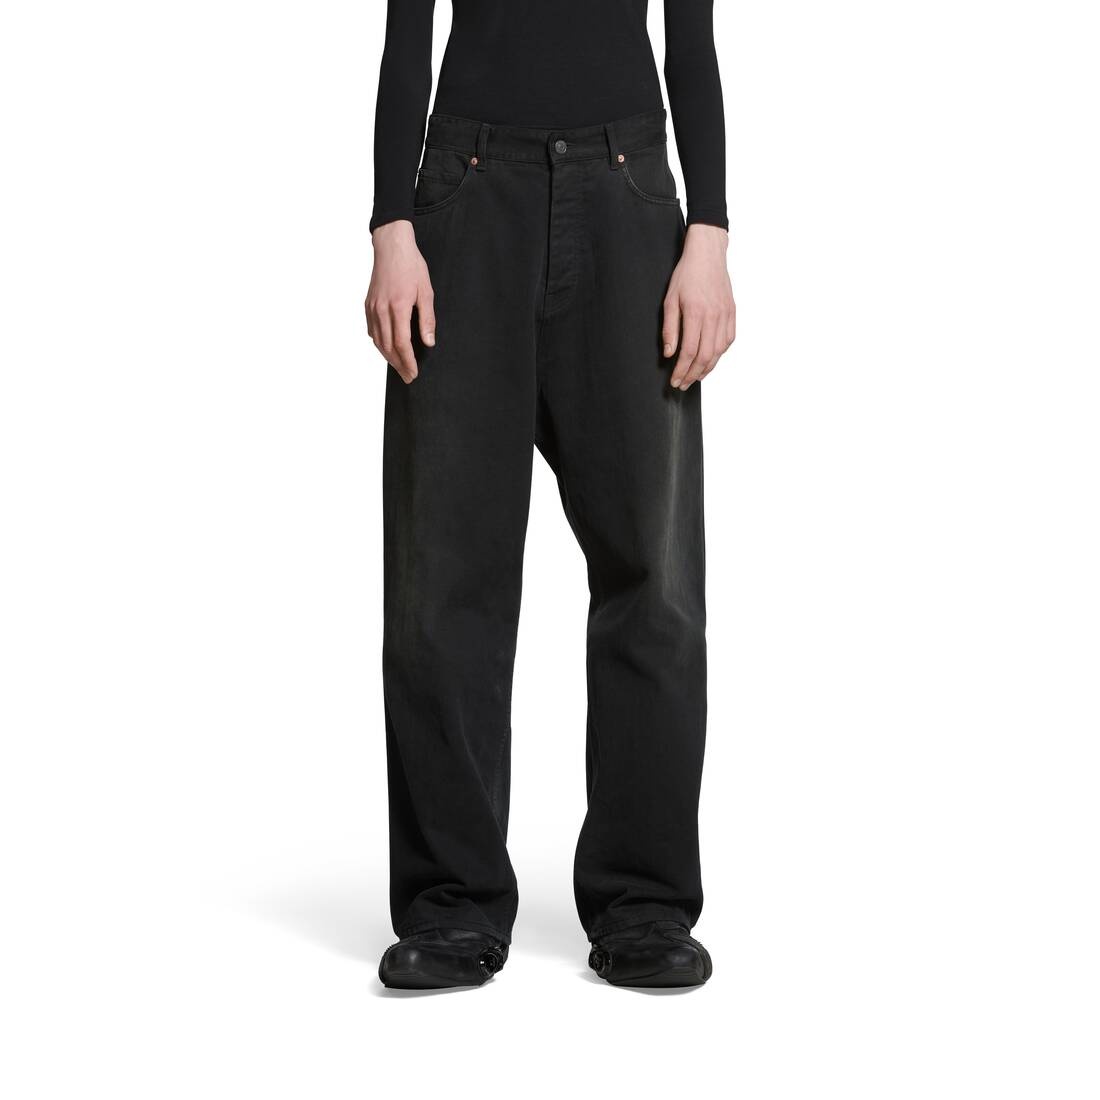 Baggy Pants in Black Faded - 5